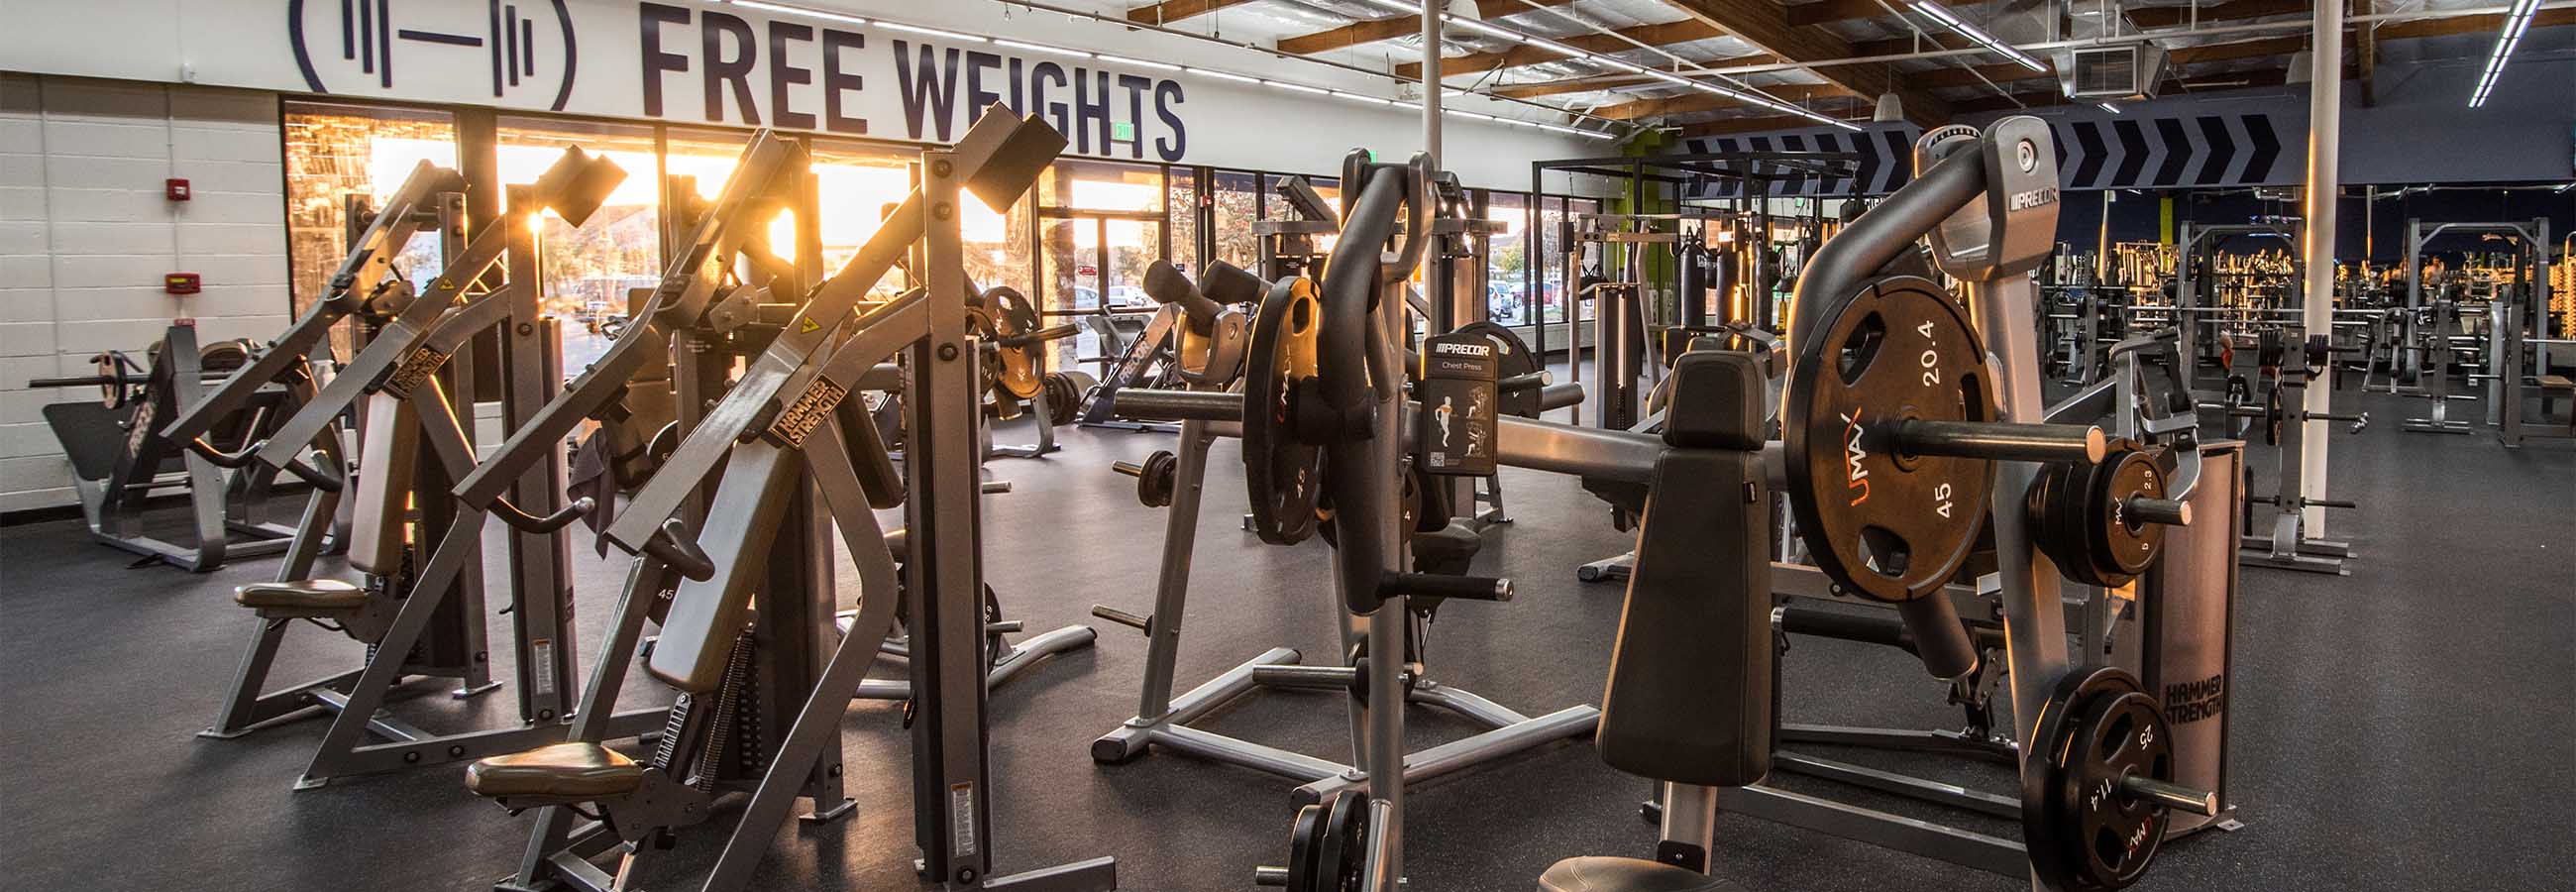 Gyms in West Salinas, California 93907